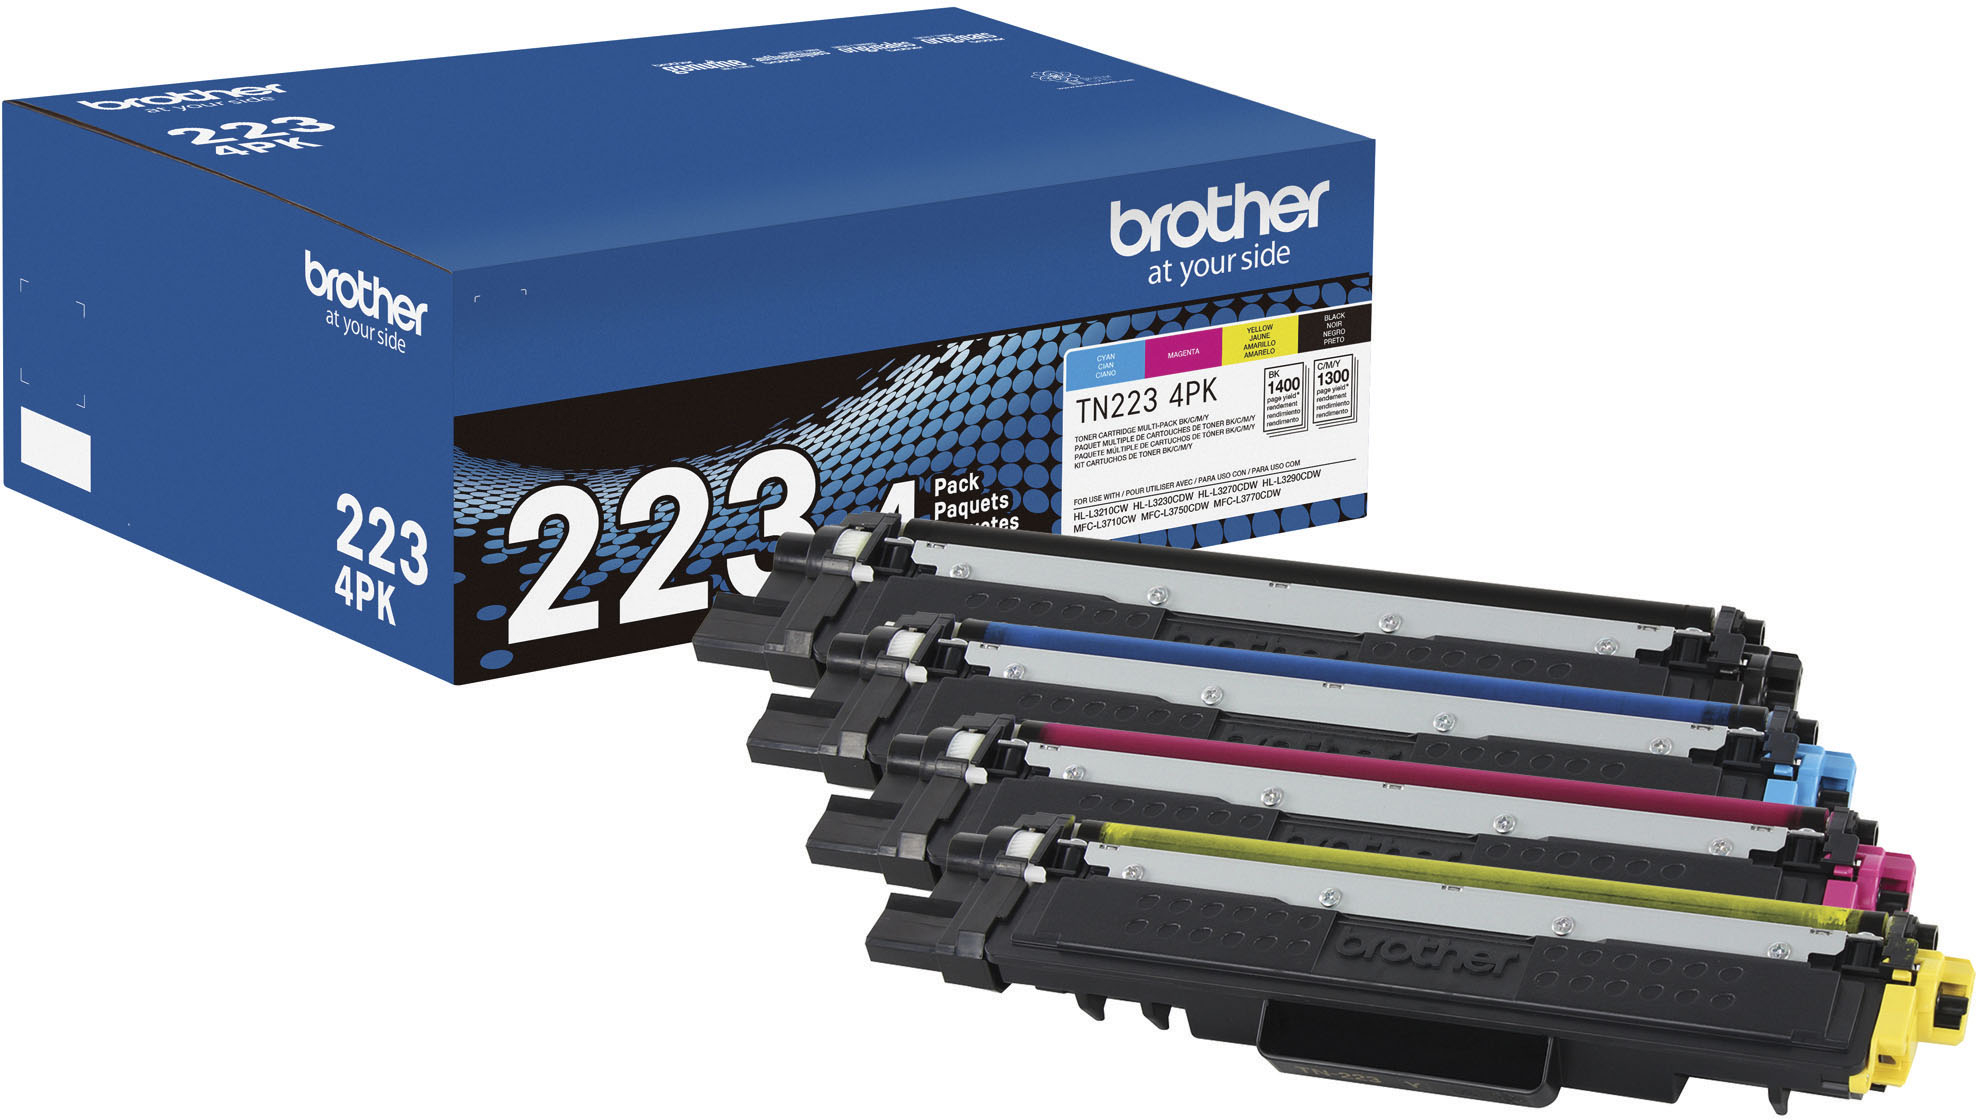 Brother TN227(CMY) High Yield Color Toner Set Cyan,Magenta, Yellow 3 Pack  for HL-L3210CW, HL-L3230CDW, MFC-L3750CDW in Retail Packaging